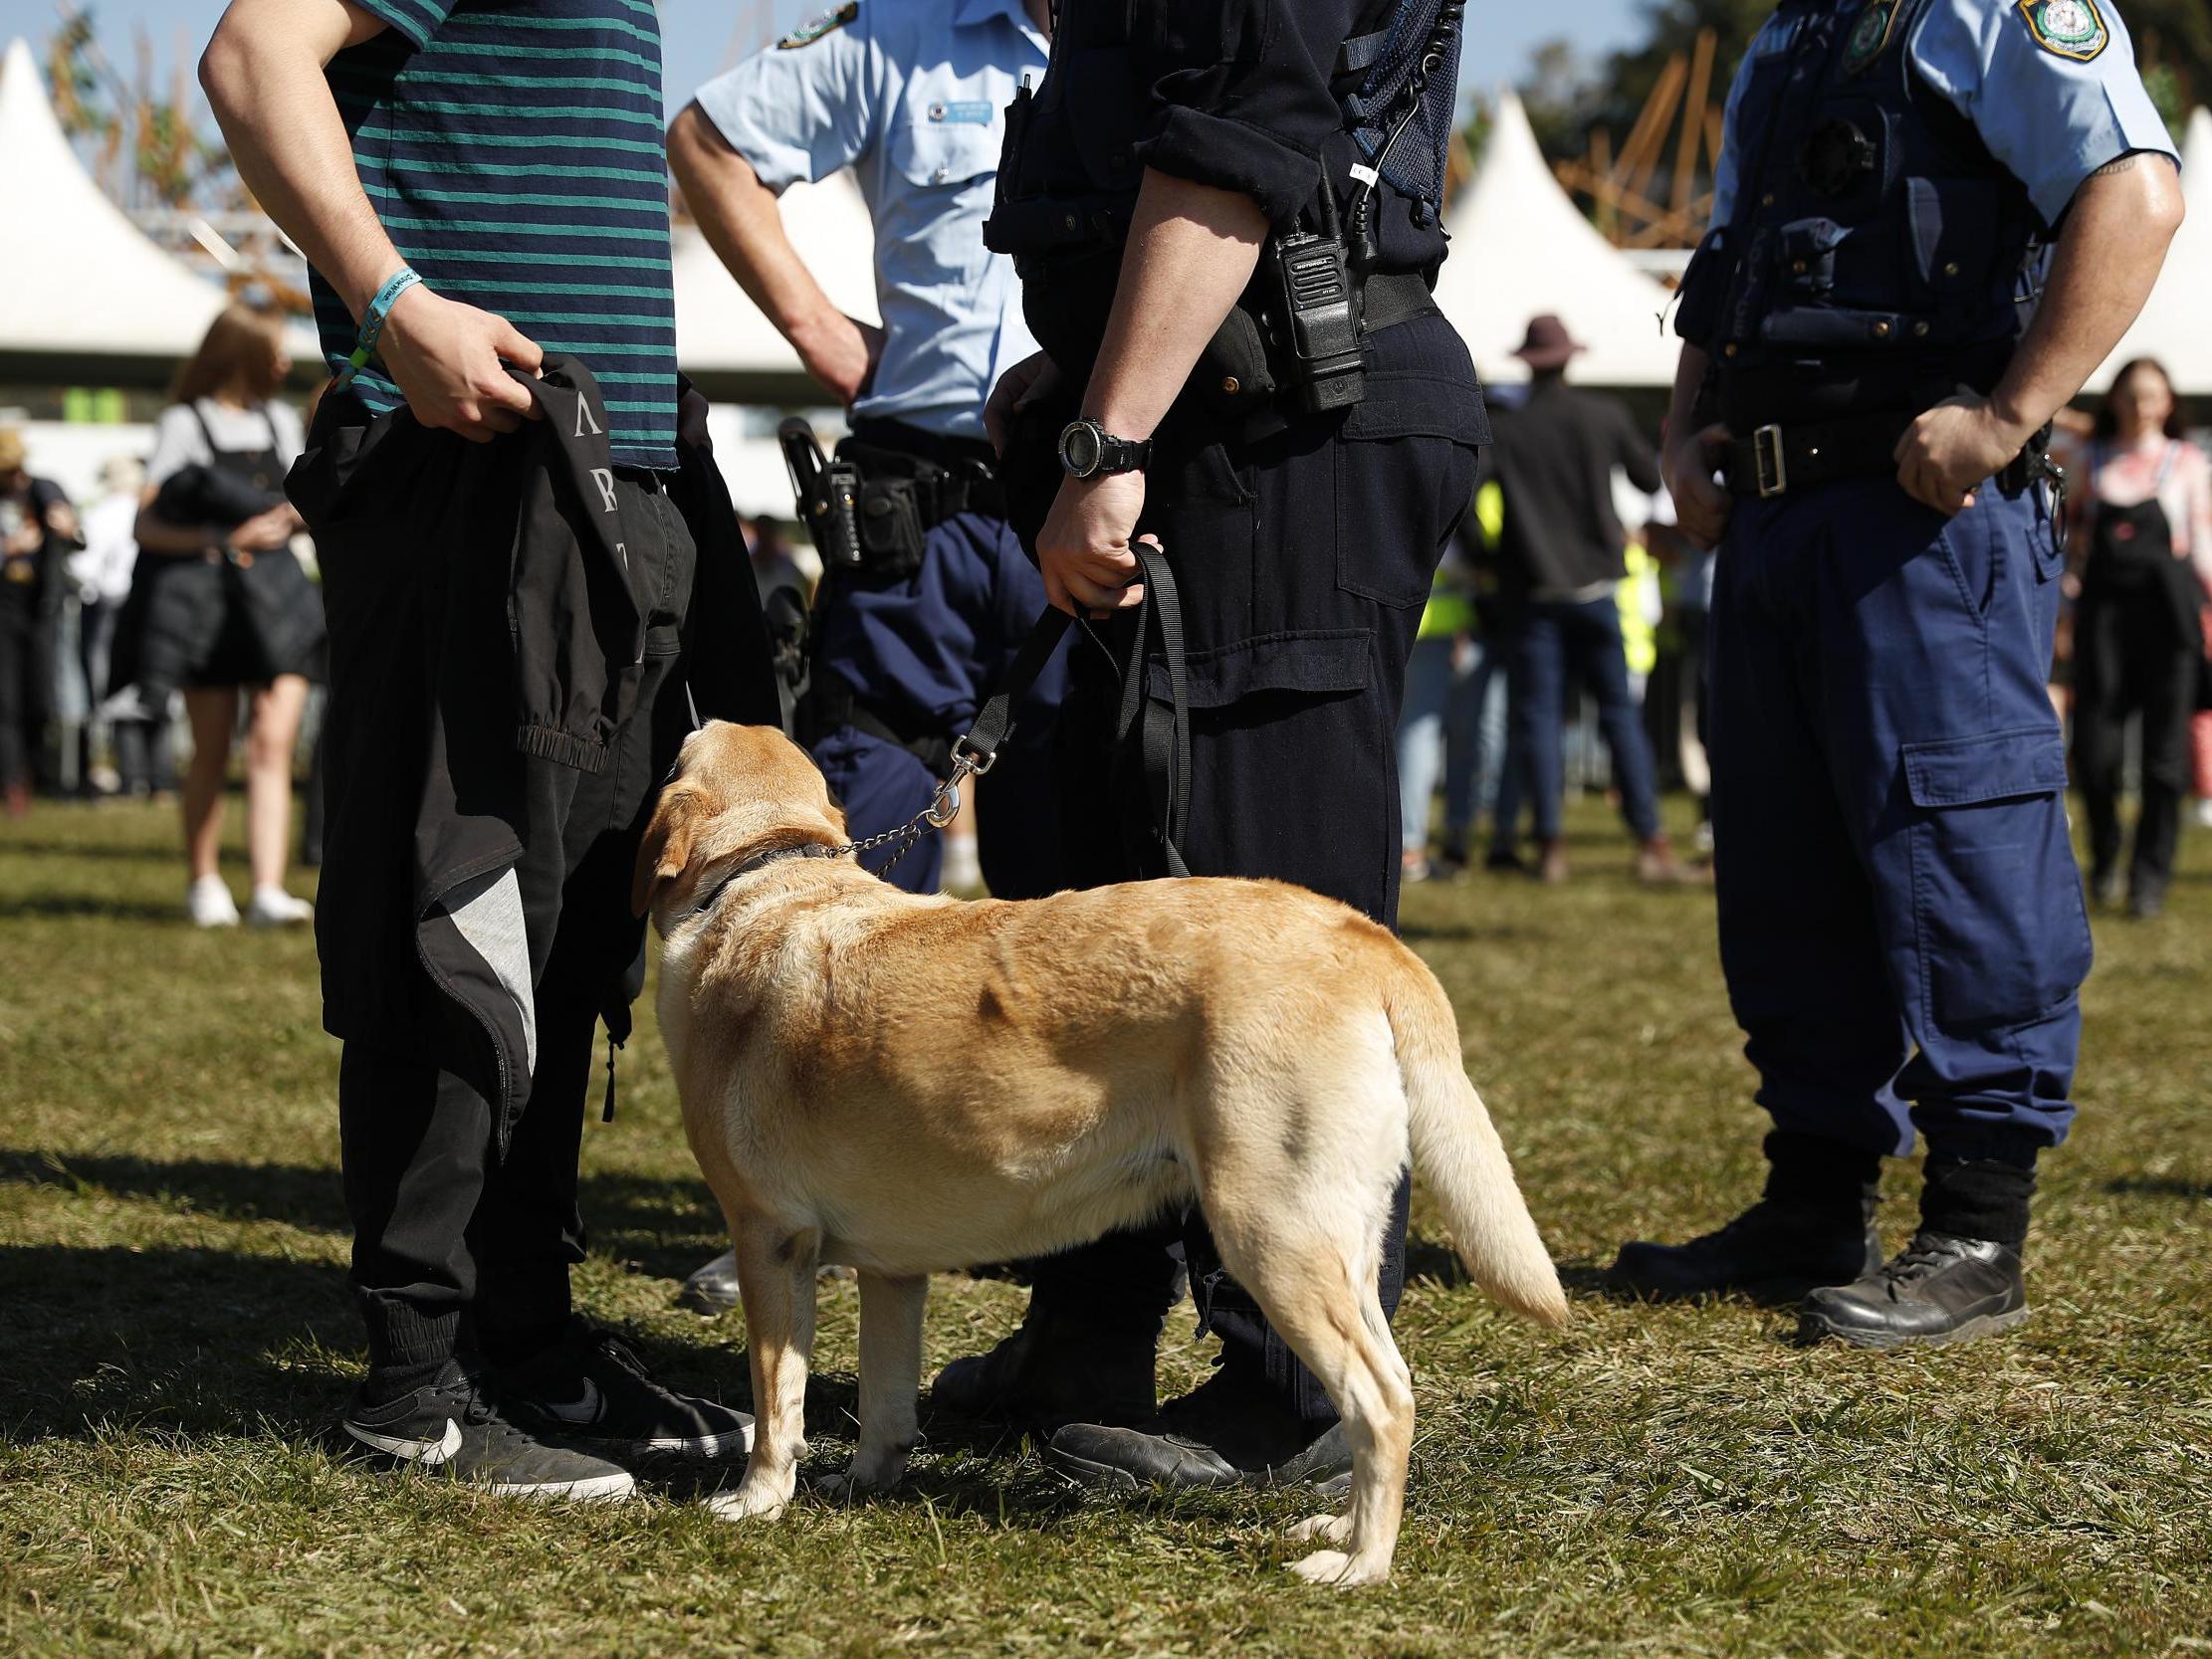 Most of the potentially unlawful searches were prompted by an indication from a drug-sniffing dog at music festivals